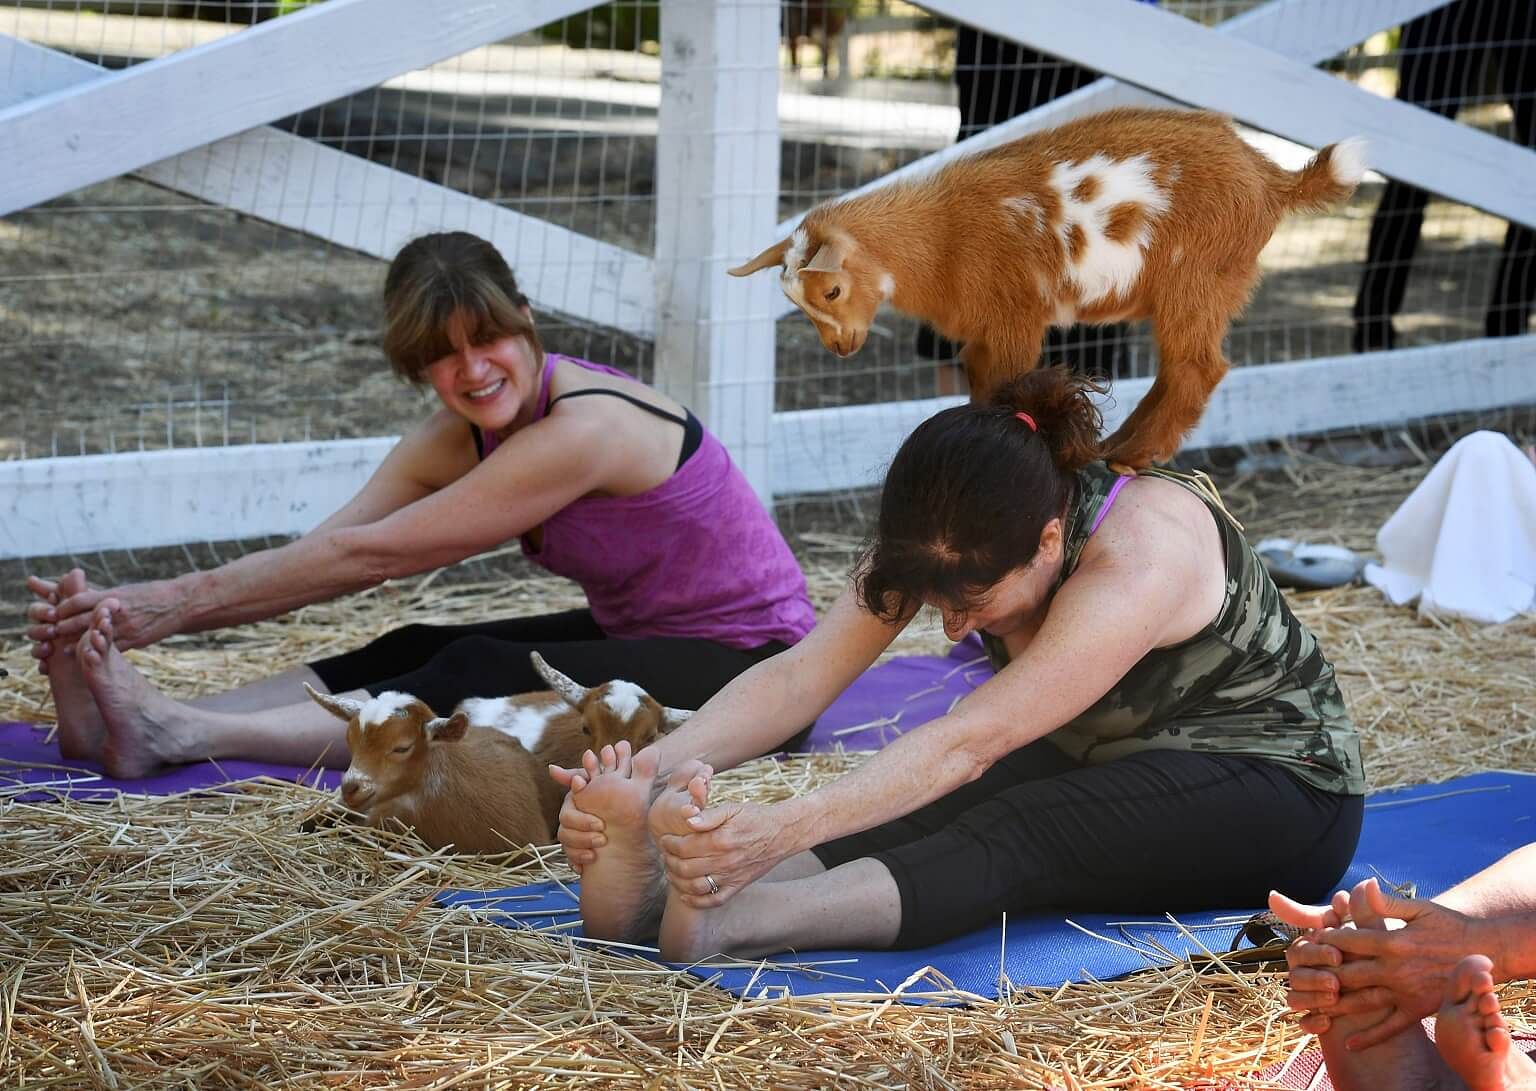 Goat Yoga craze combines relaxing pastime with small animals